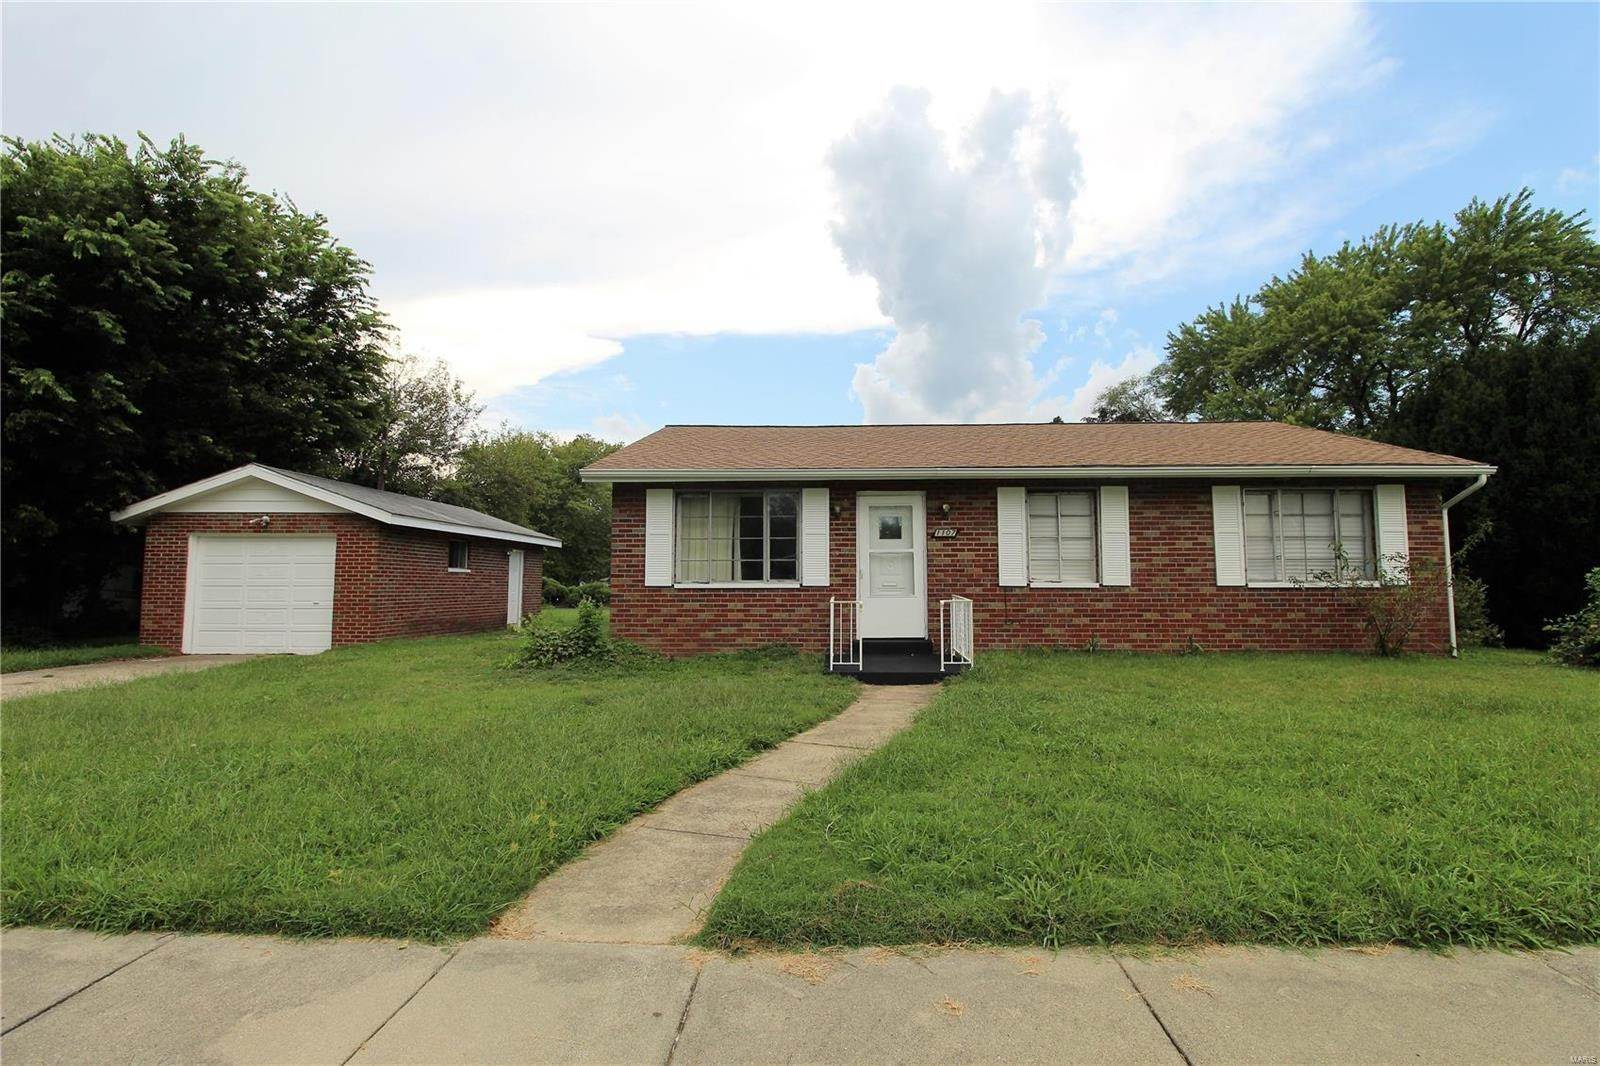 Property for Sale at 1107 N 86th Street East St. Louis, Illinois 62203 United States